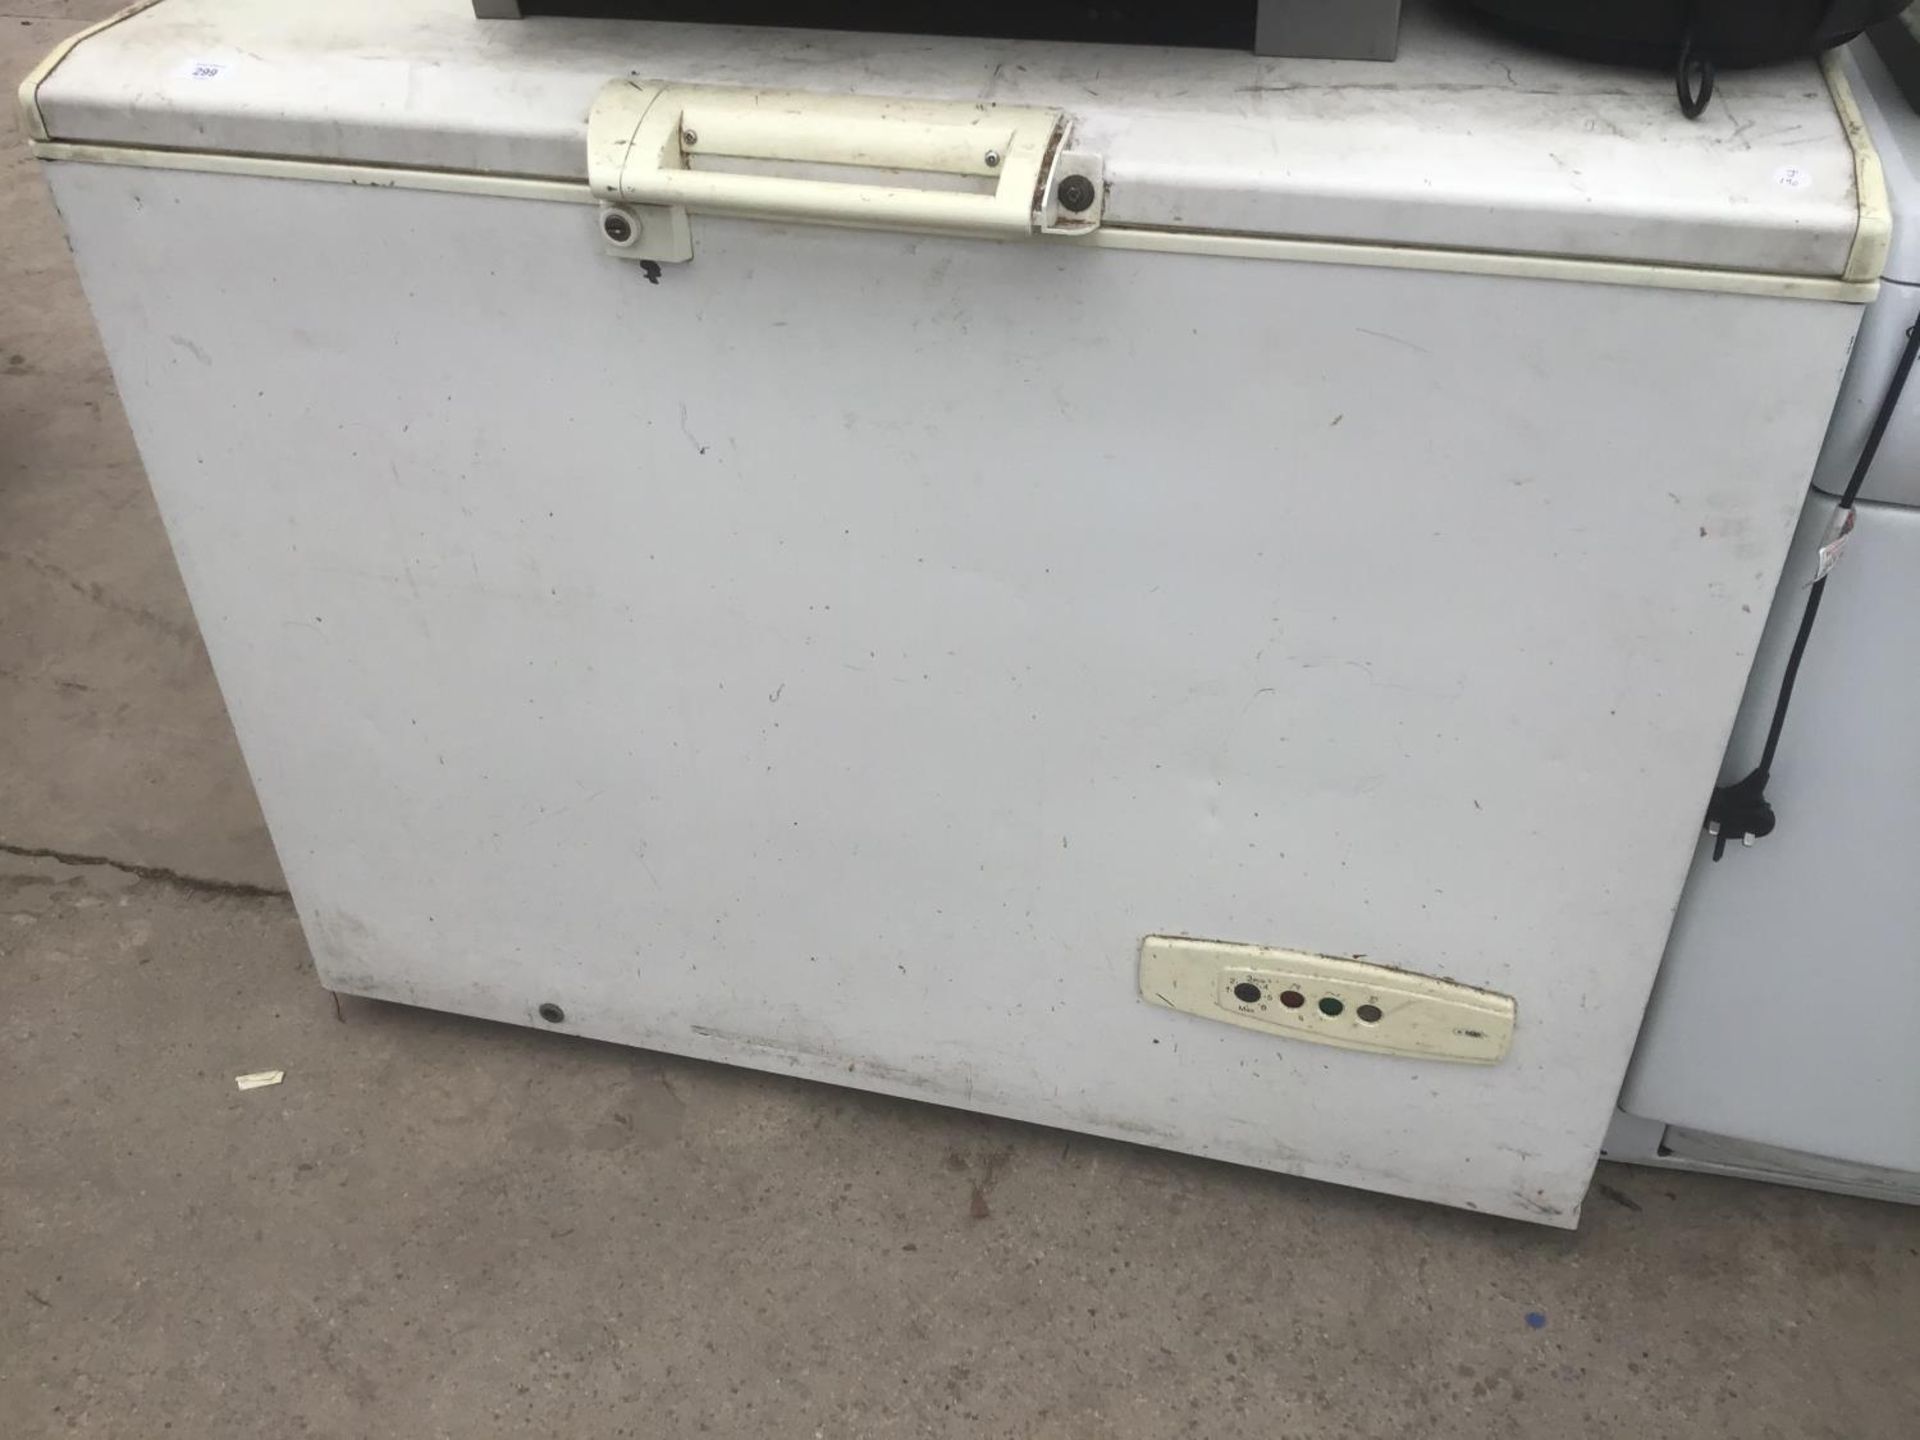 A CHEST FREEZER IN WORKING ORDER